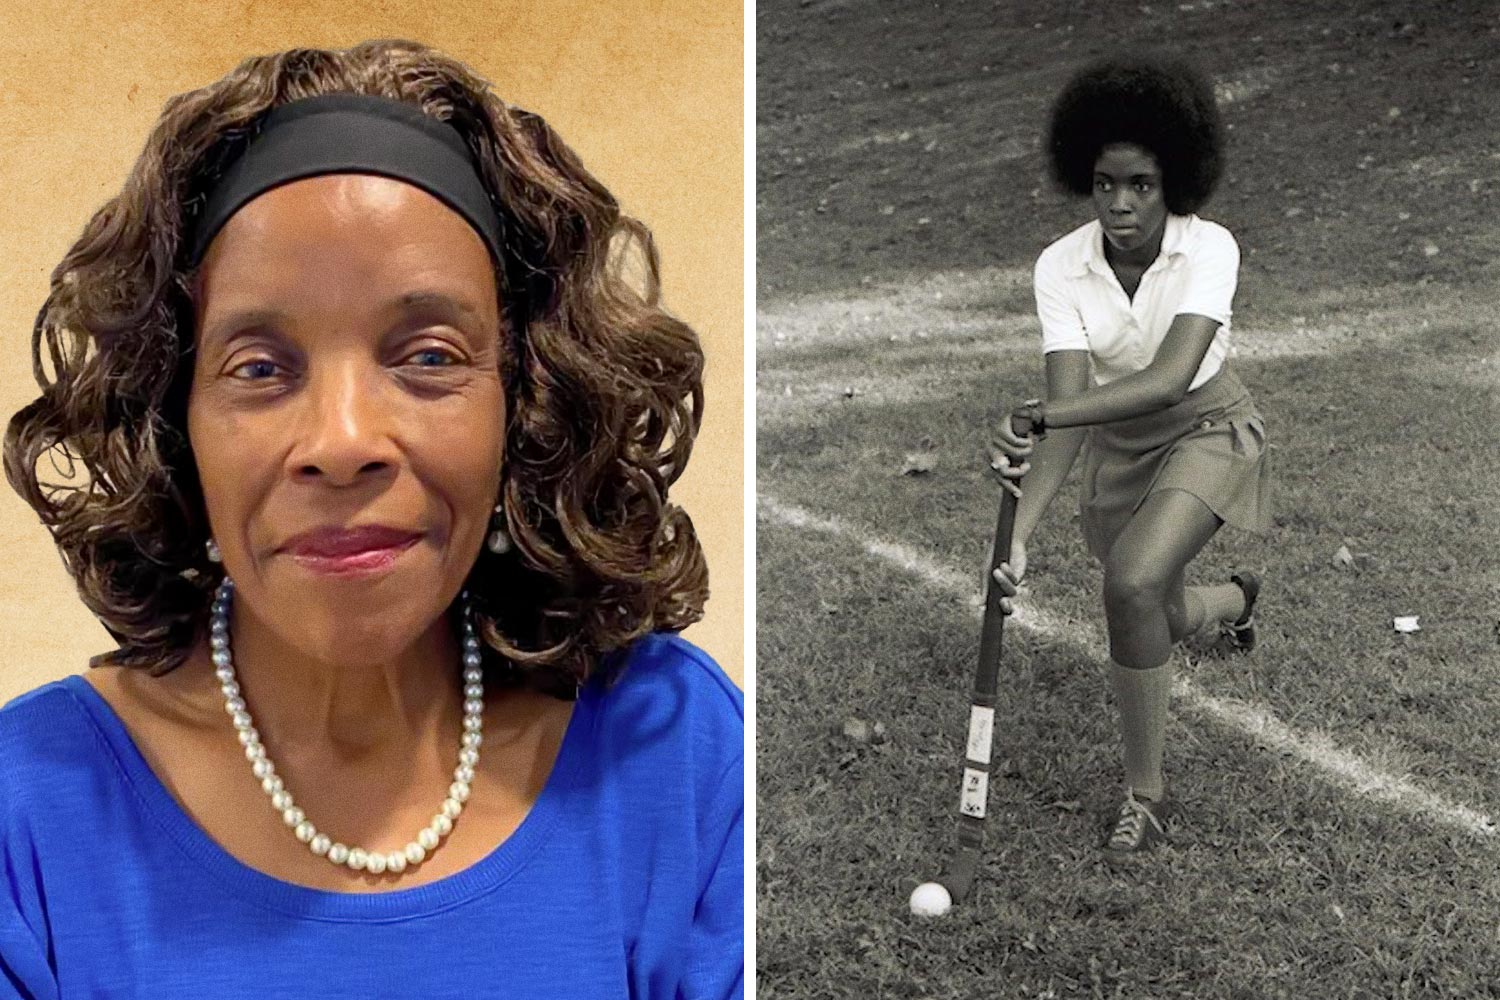 Portrait of Paulette Jone Morant and a black and white action shot of her playing field hockey